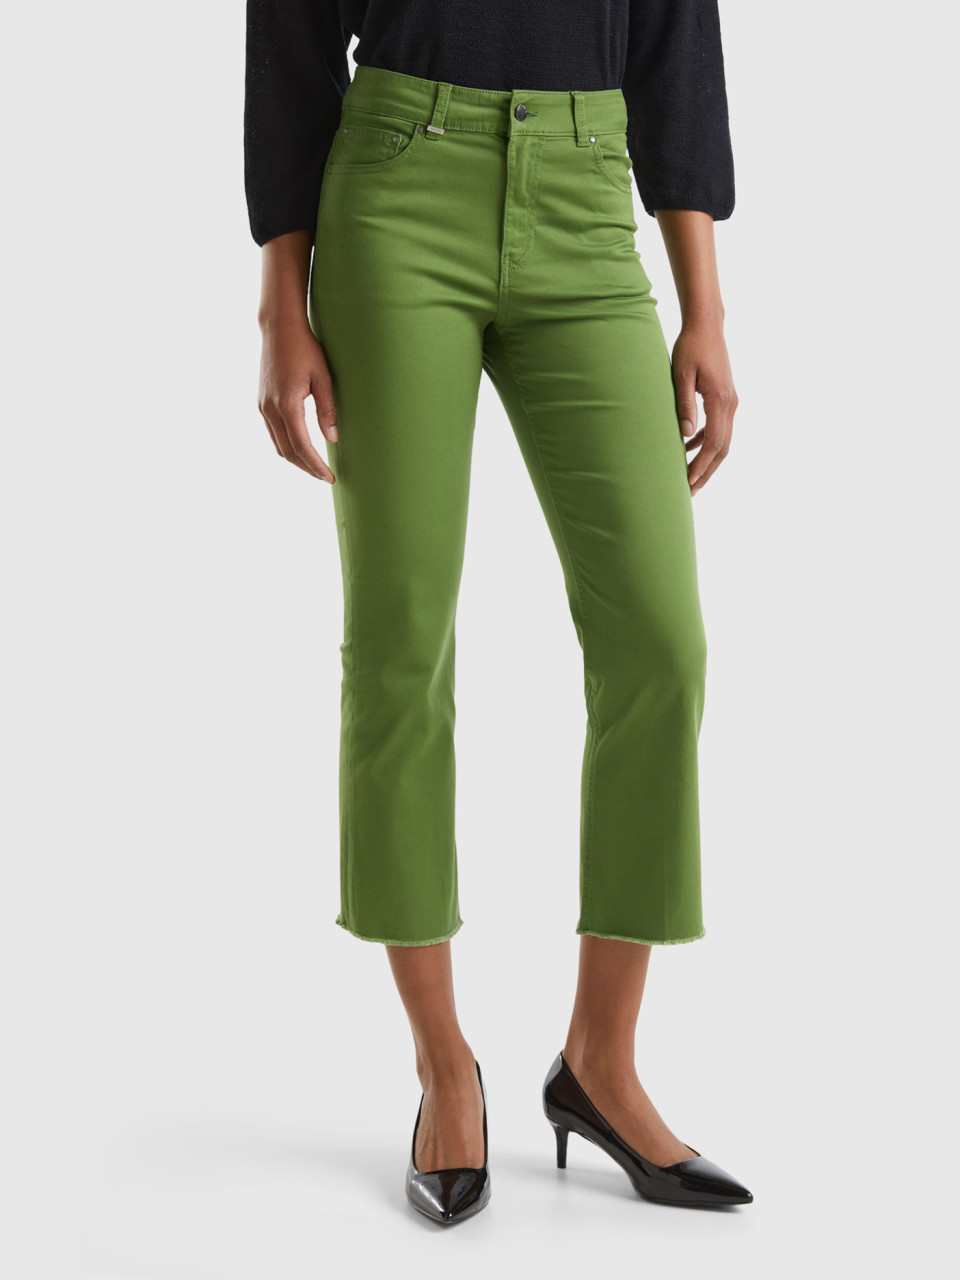 Benetton, Five-pocket Cropped Trousers, Military Green, Women